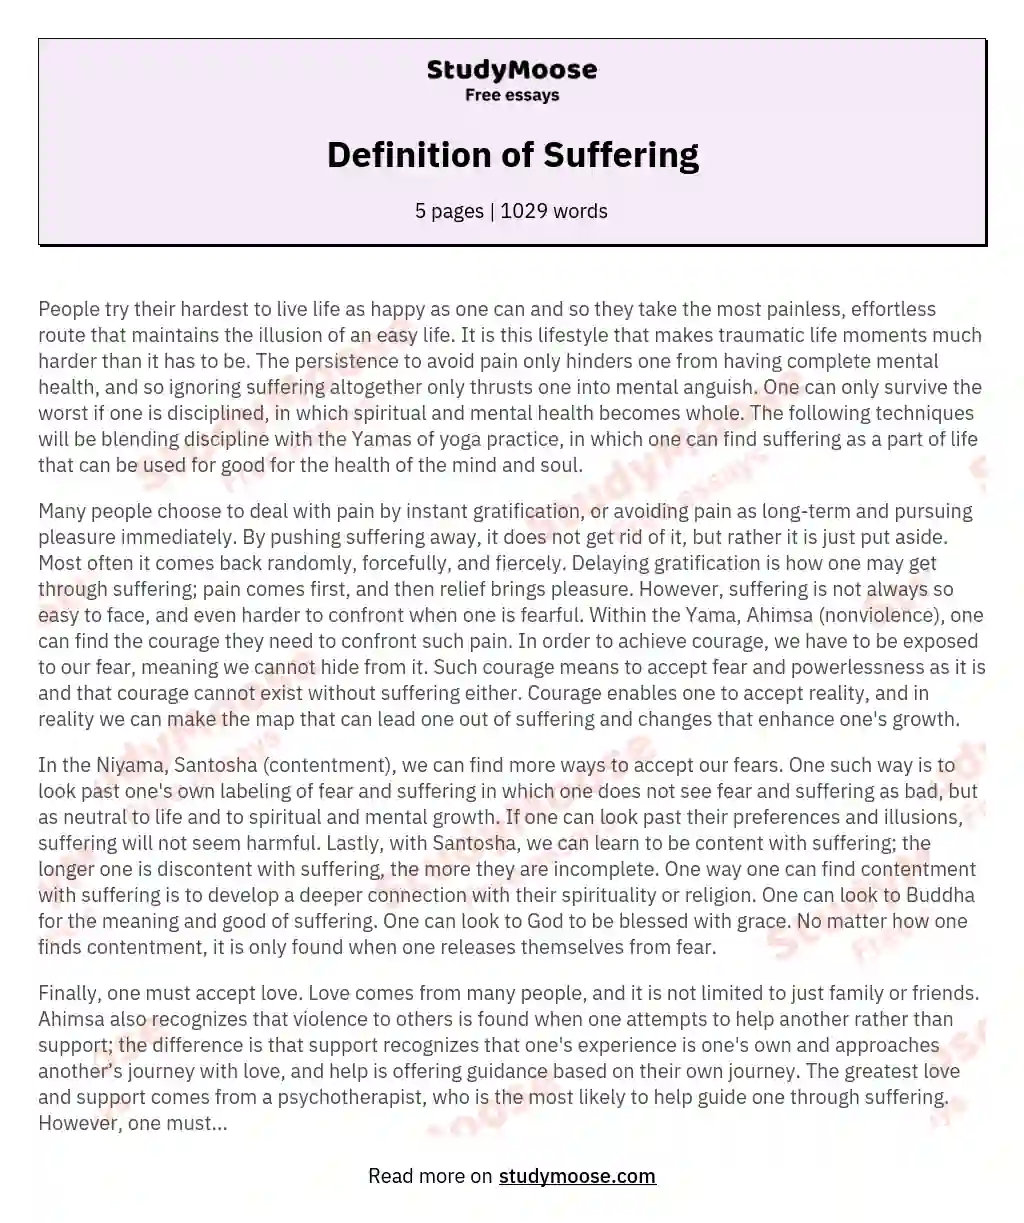 Definition of Suffering